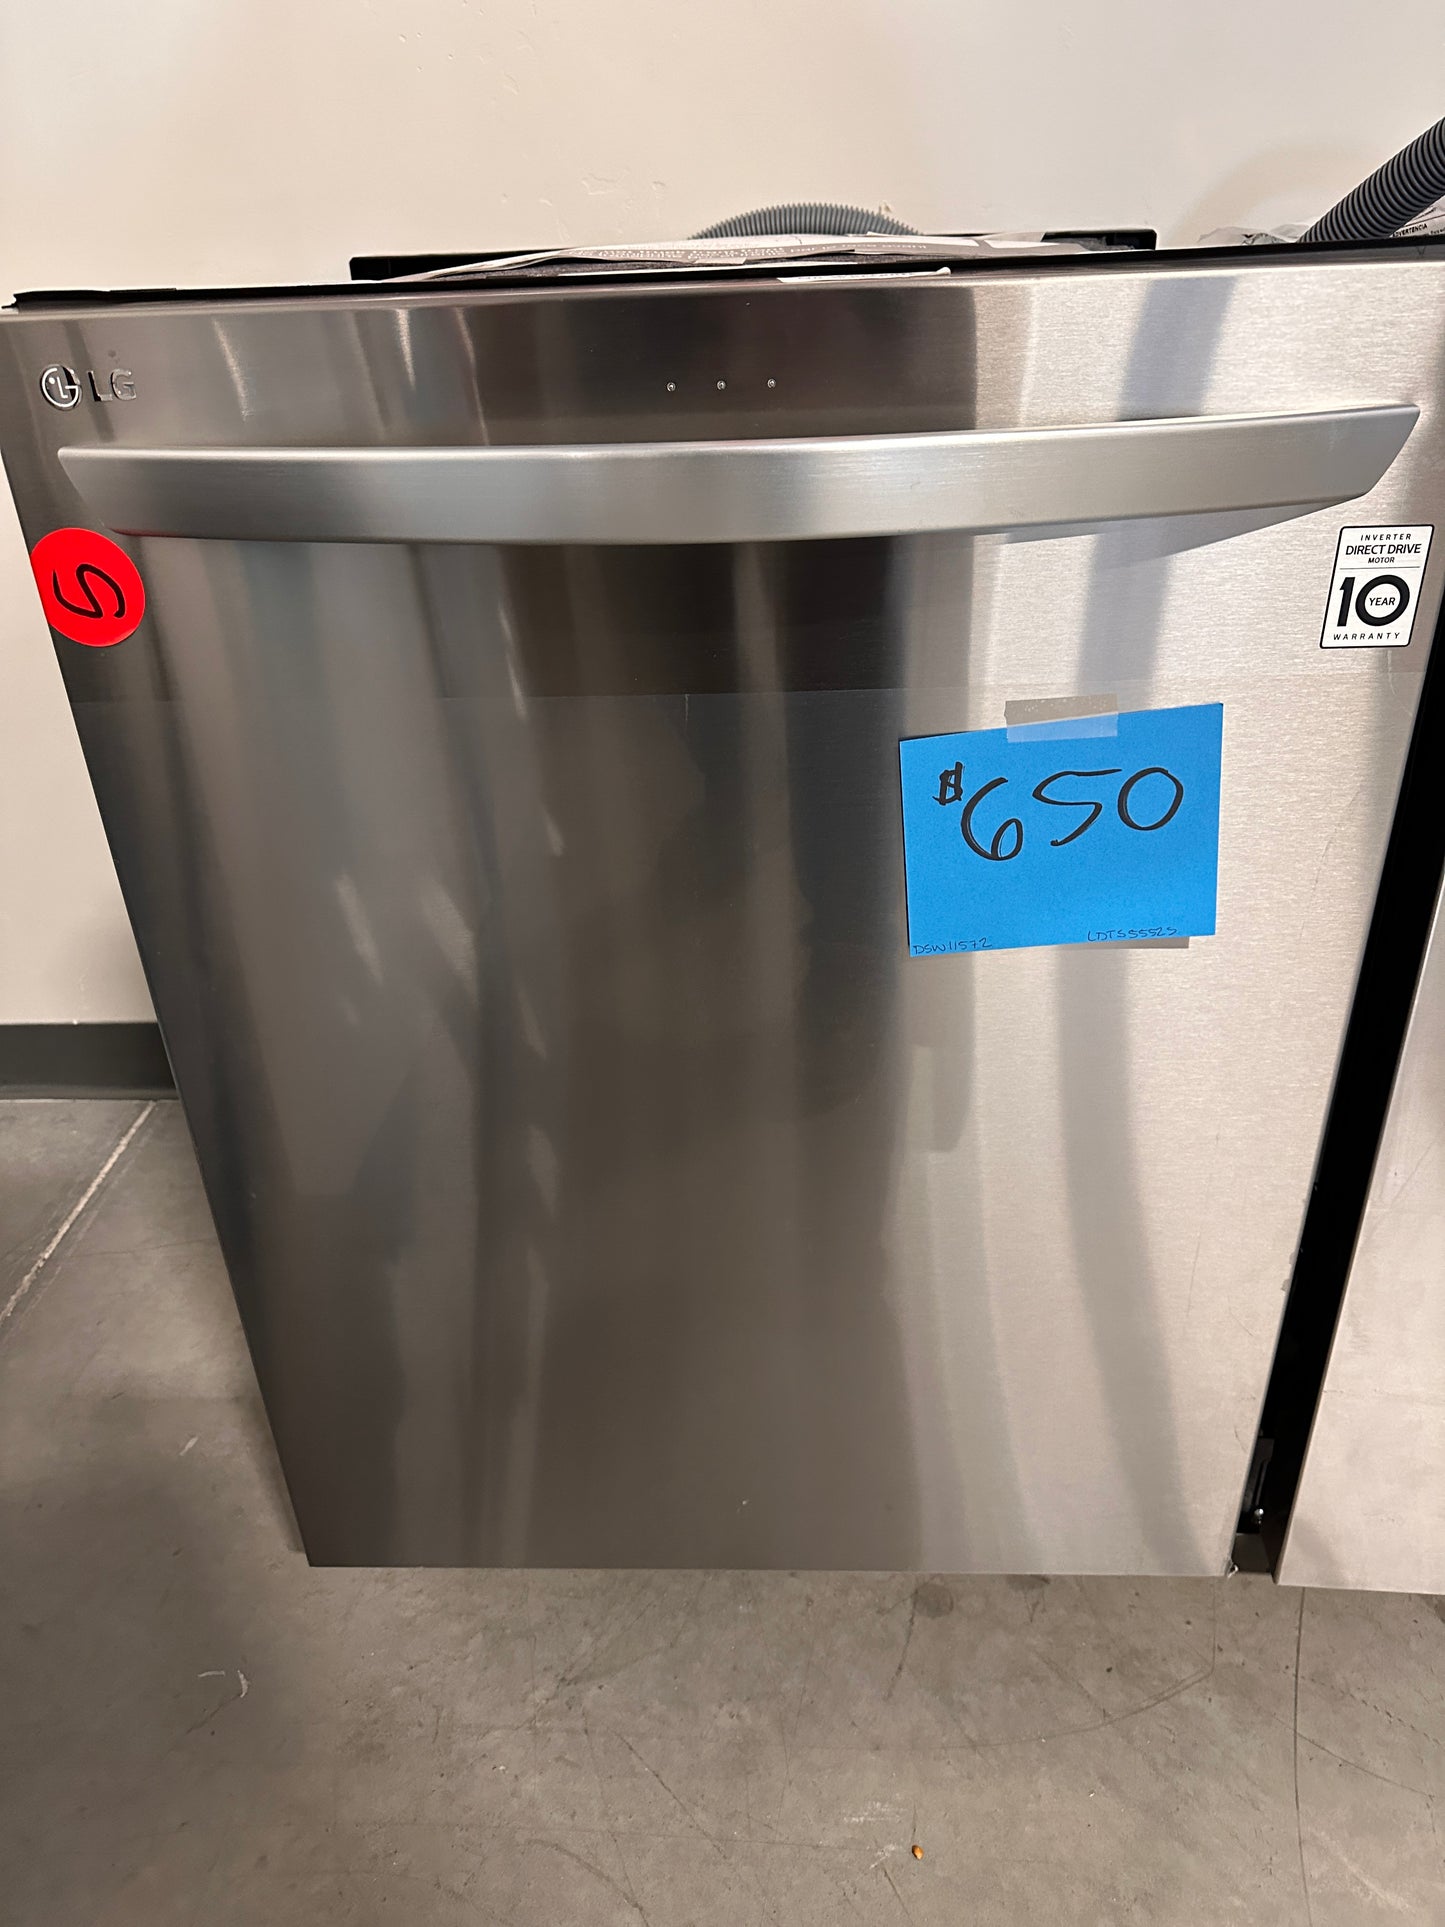 NEW LG DISHWASHER with 3RD RACK - DSW11572